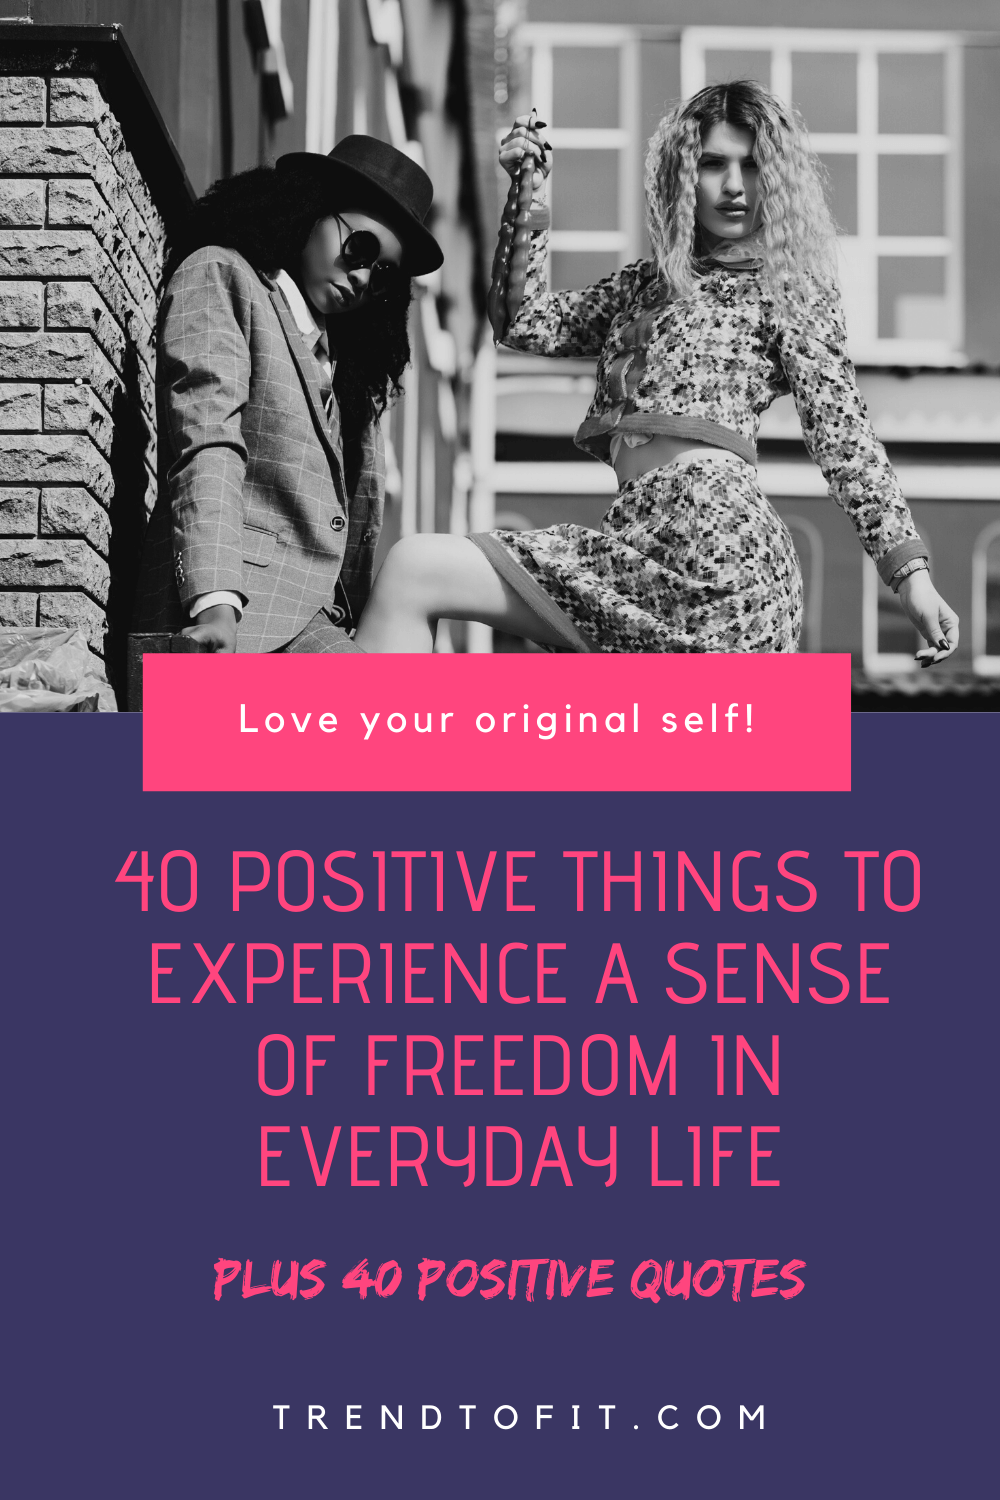 40 positive things about yourself (+40 Positive quotes)